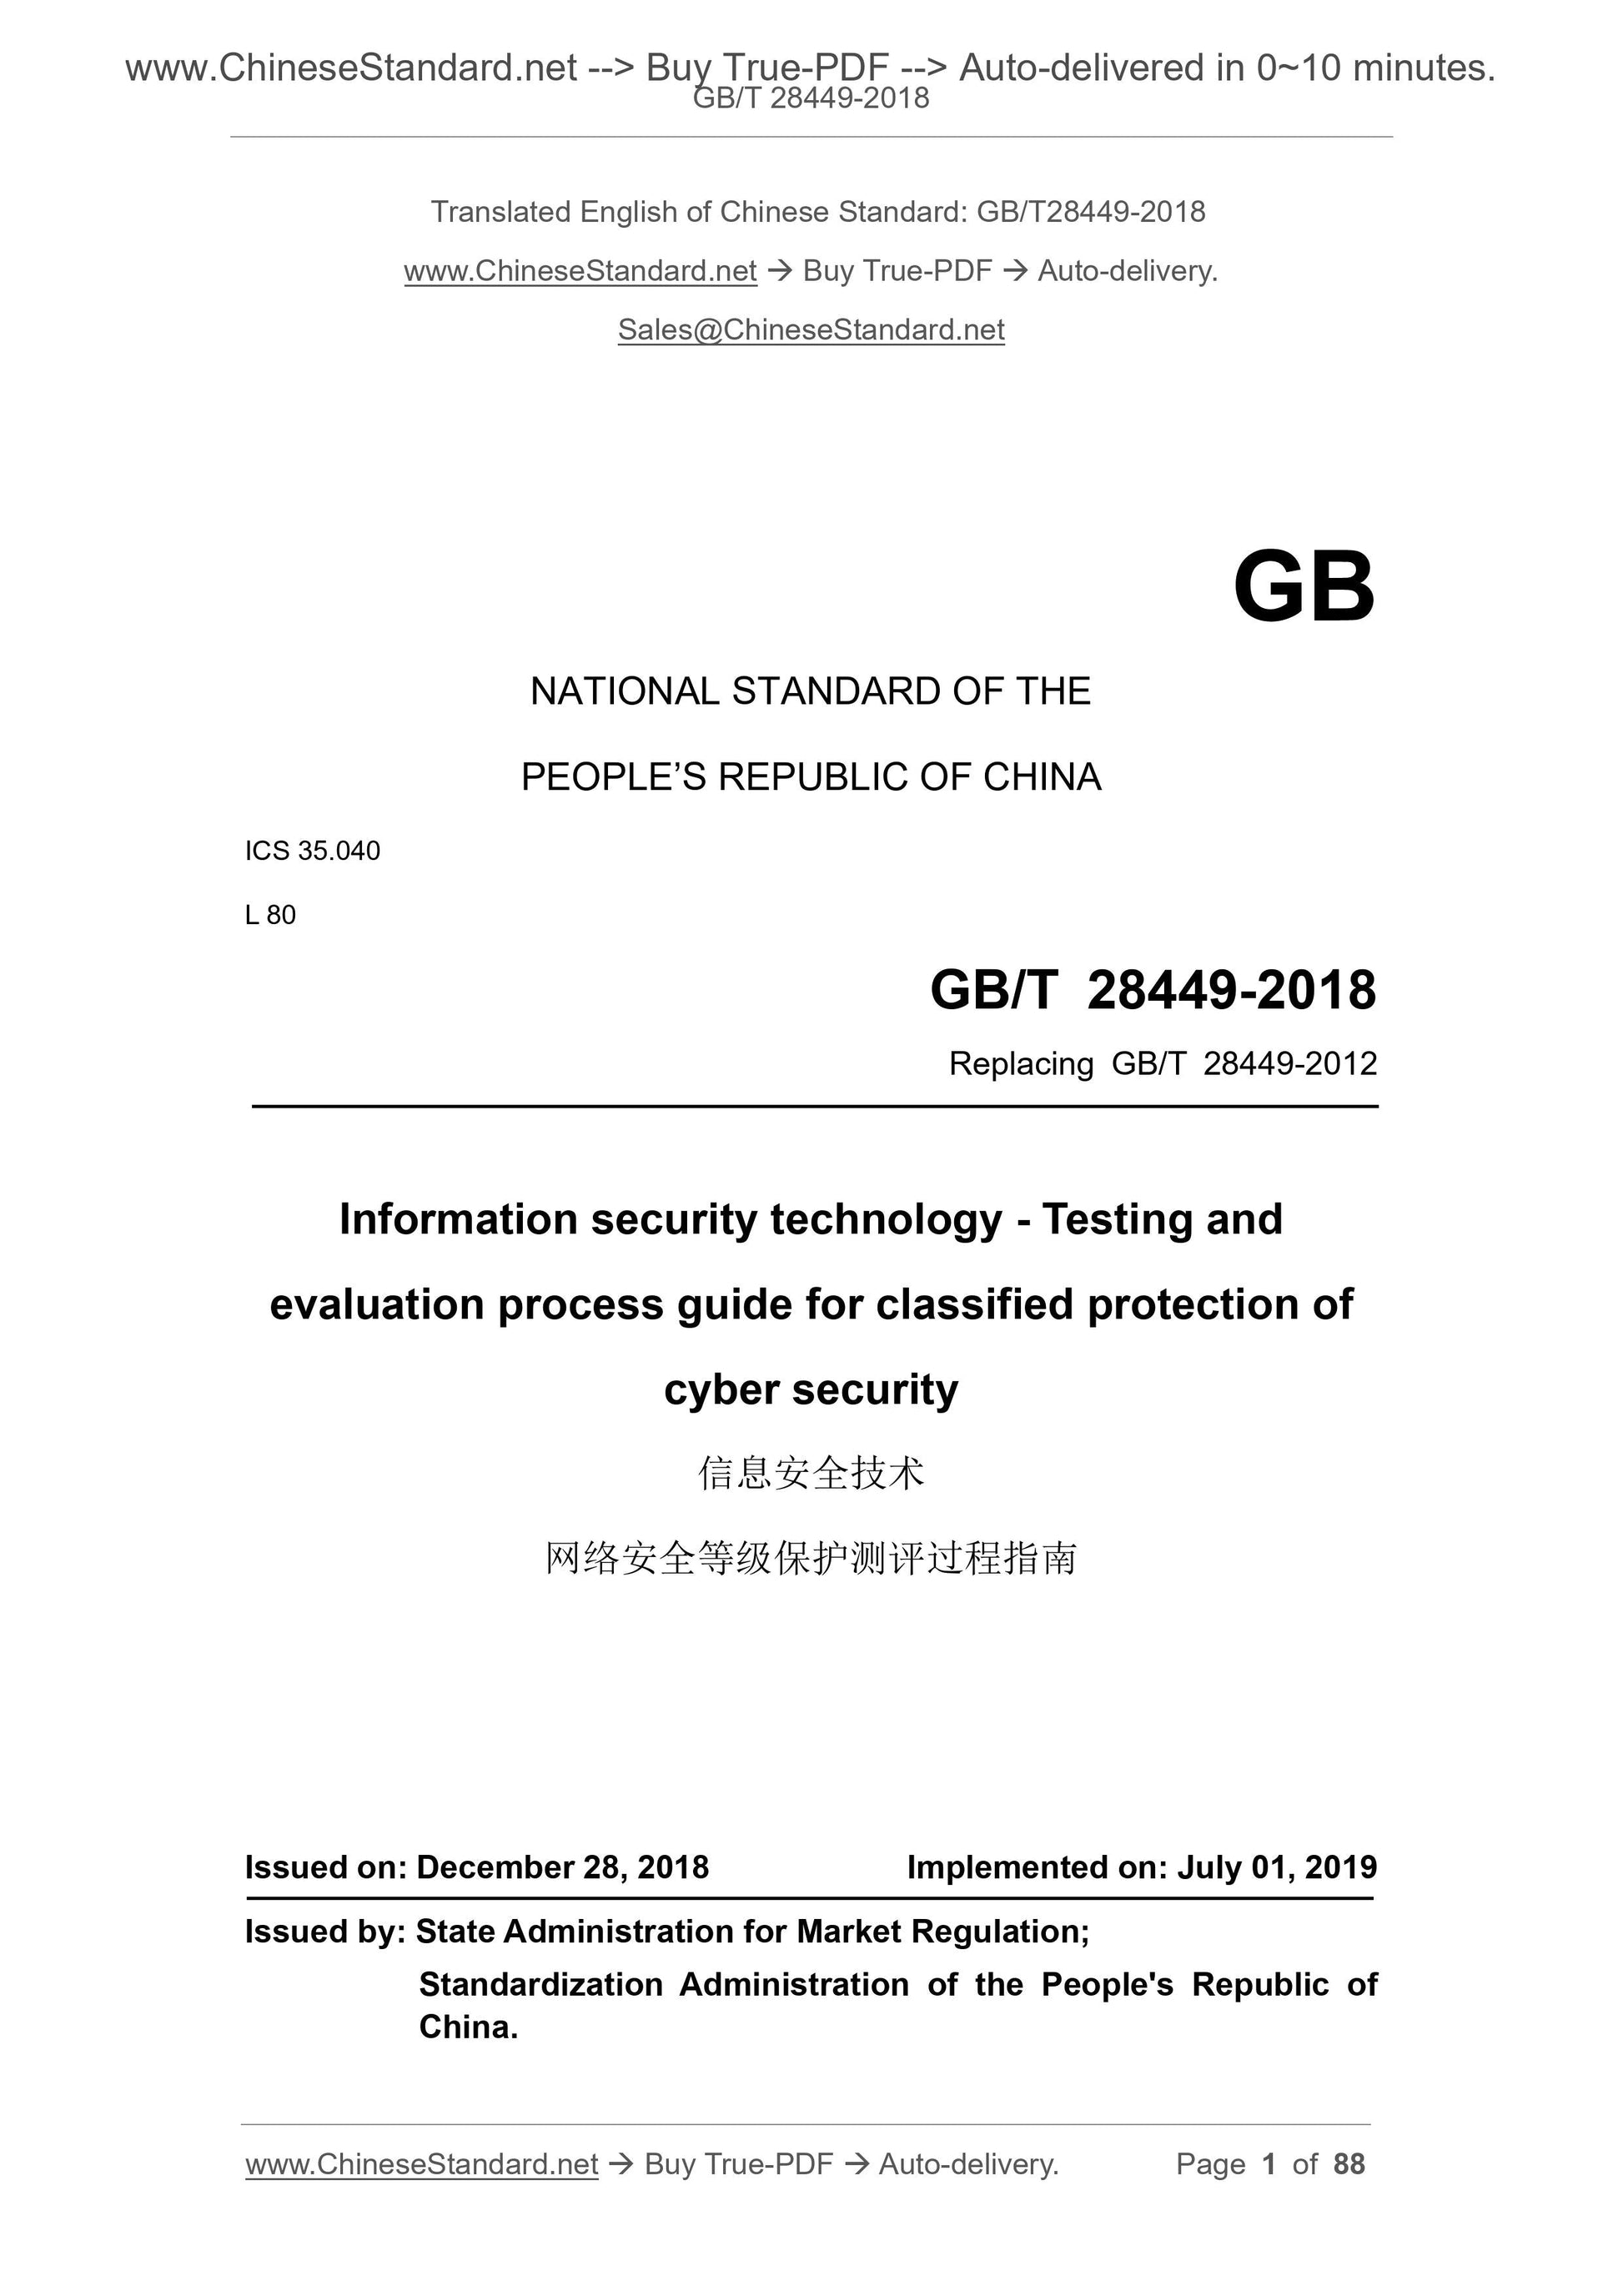 GB/T 28449-2018 Page 1